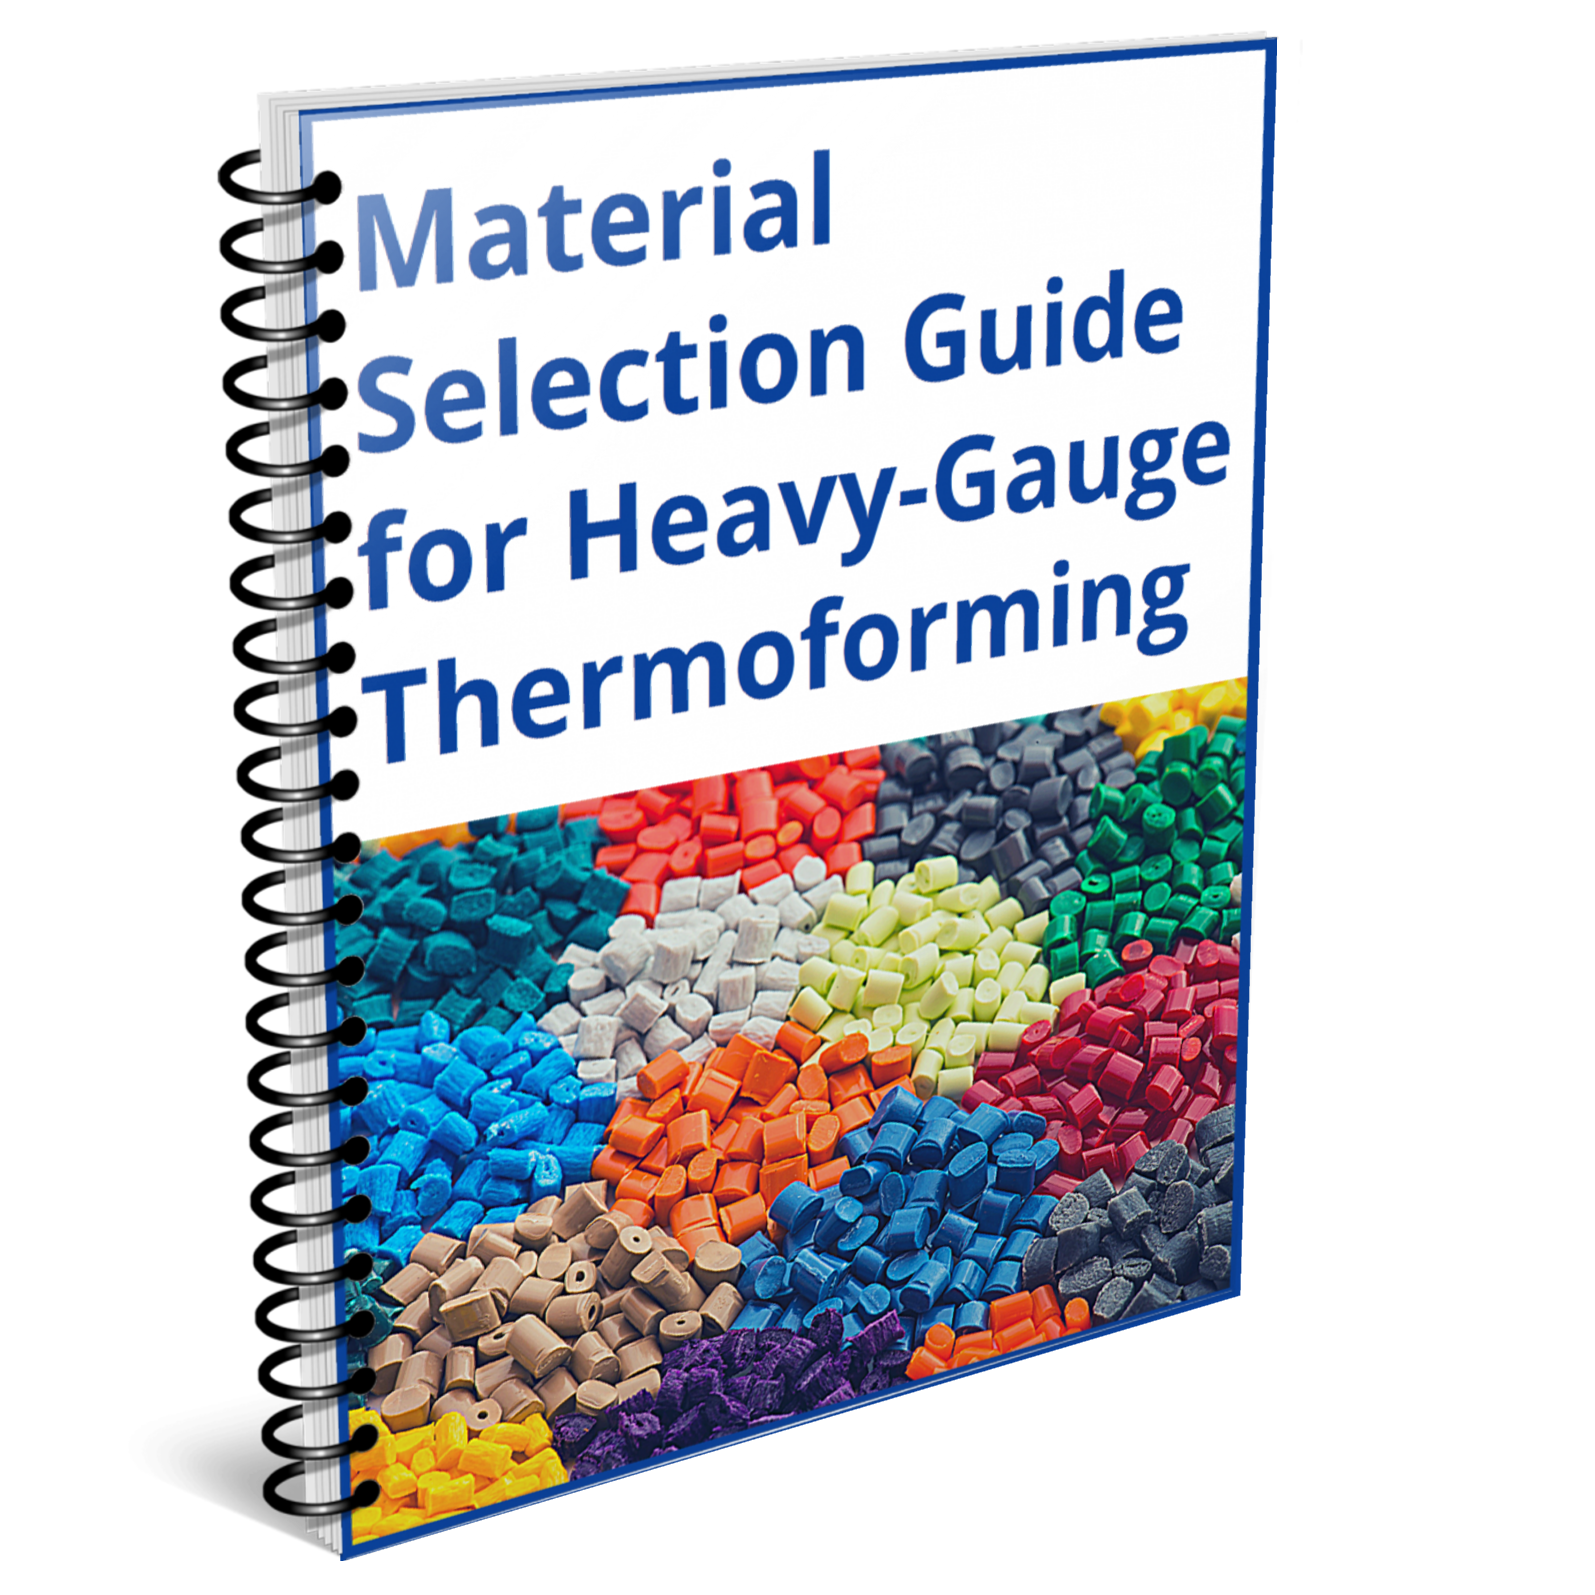 material-selection-guide-for-heavy-gauge-thermoforming-finished-cover